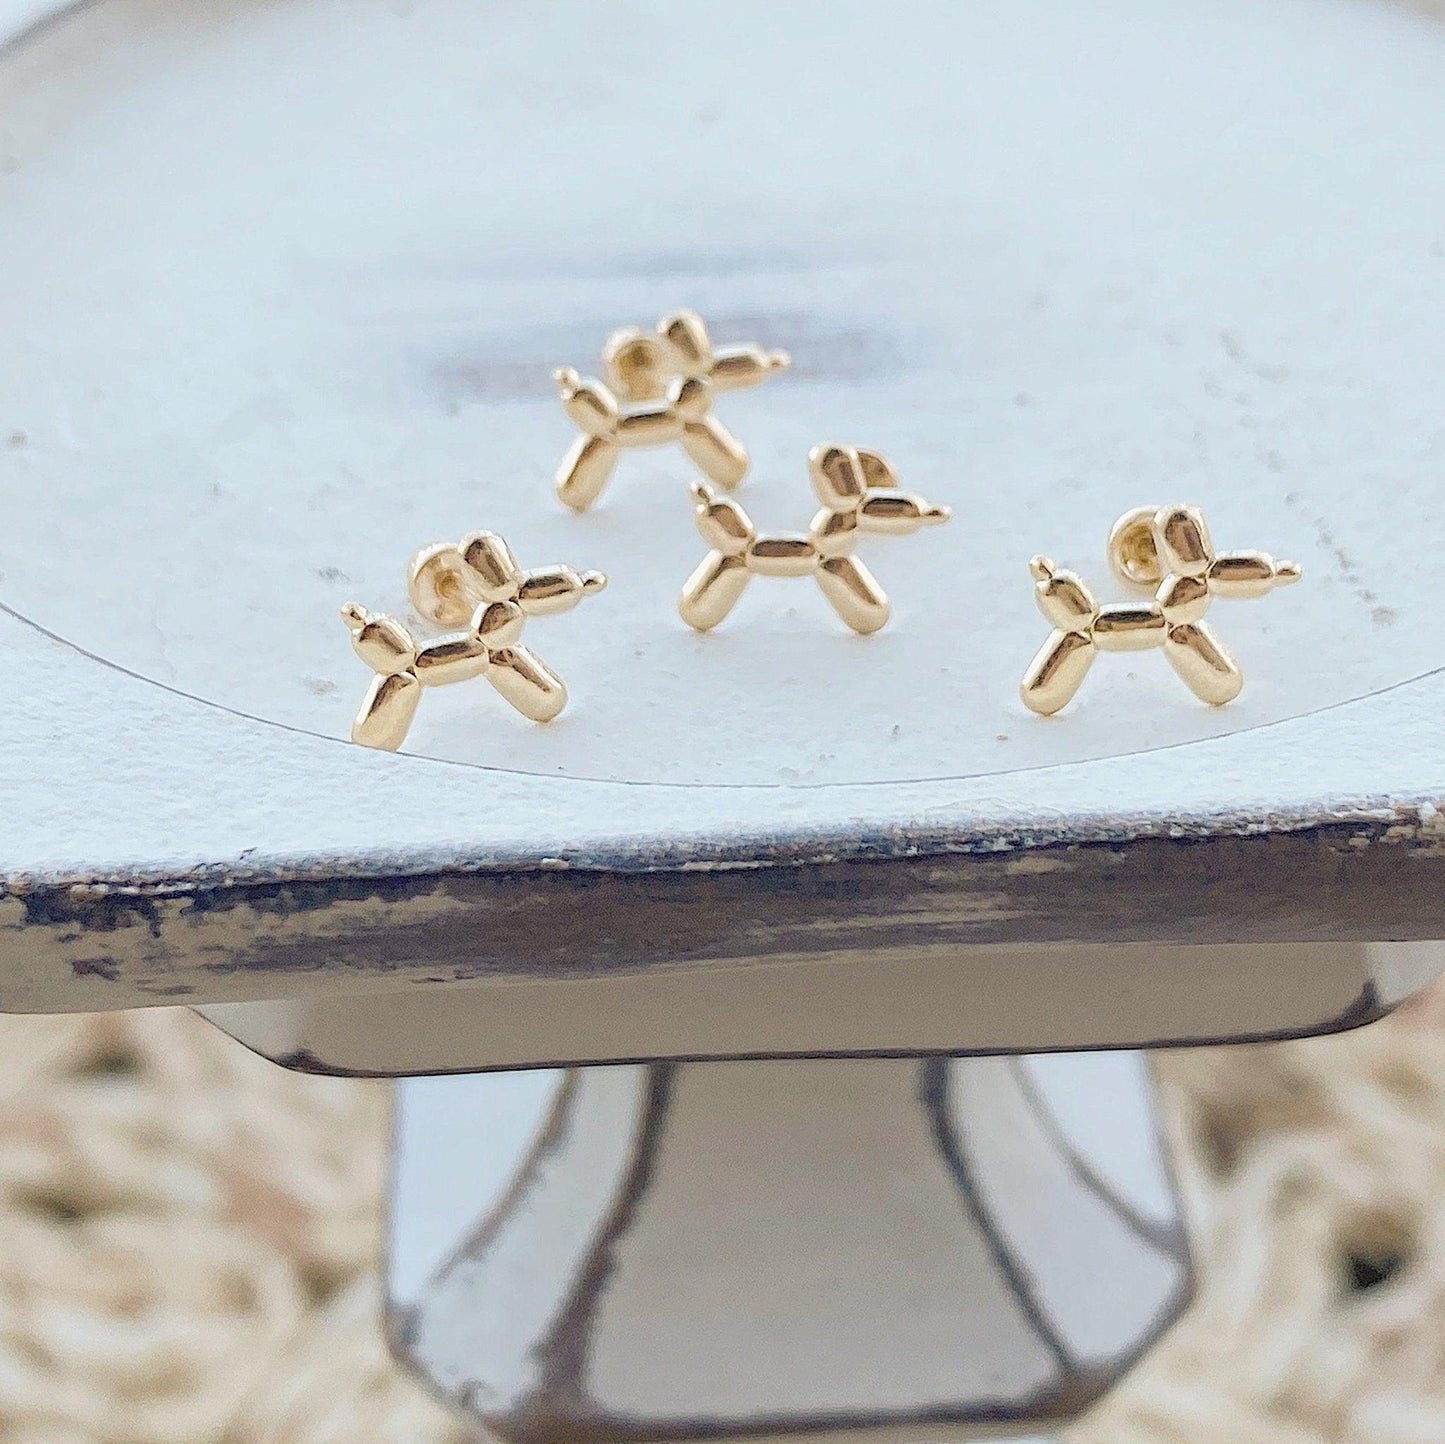 These gold dog earrings are perfect for anyone who loves dogs! They can be worn with jeans, or formal attire. The earrings arrive in a little glass bottle to make them a great gift for any occasion.